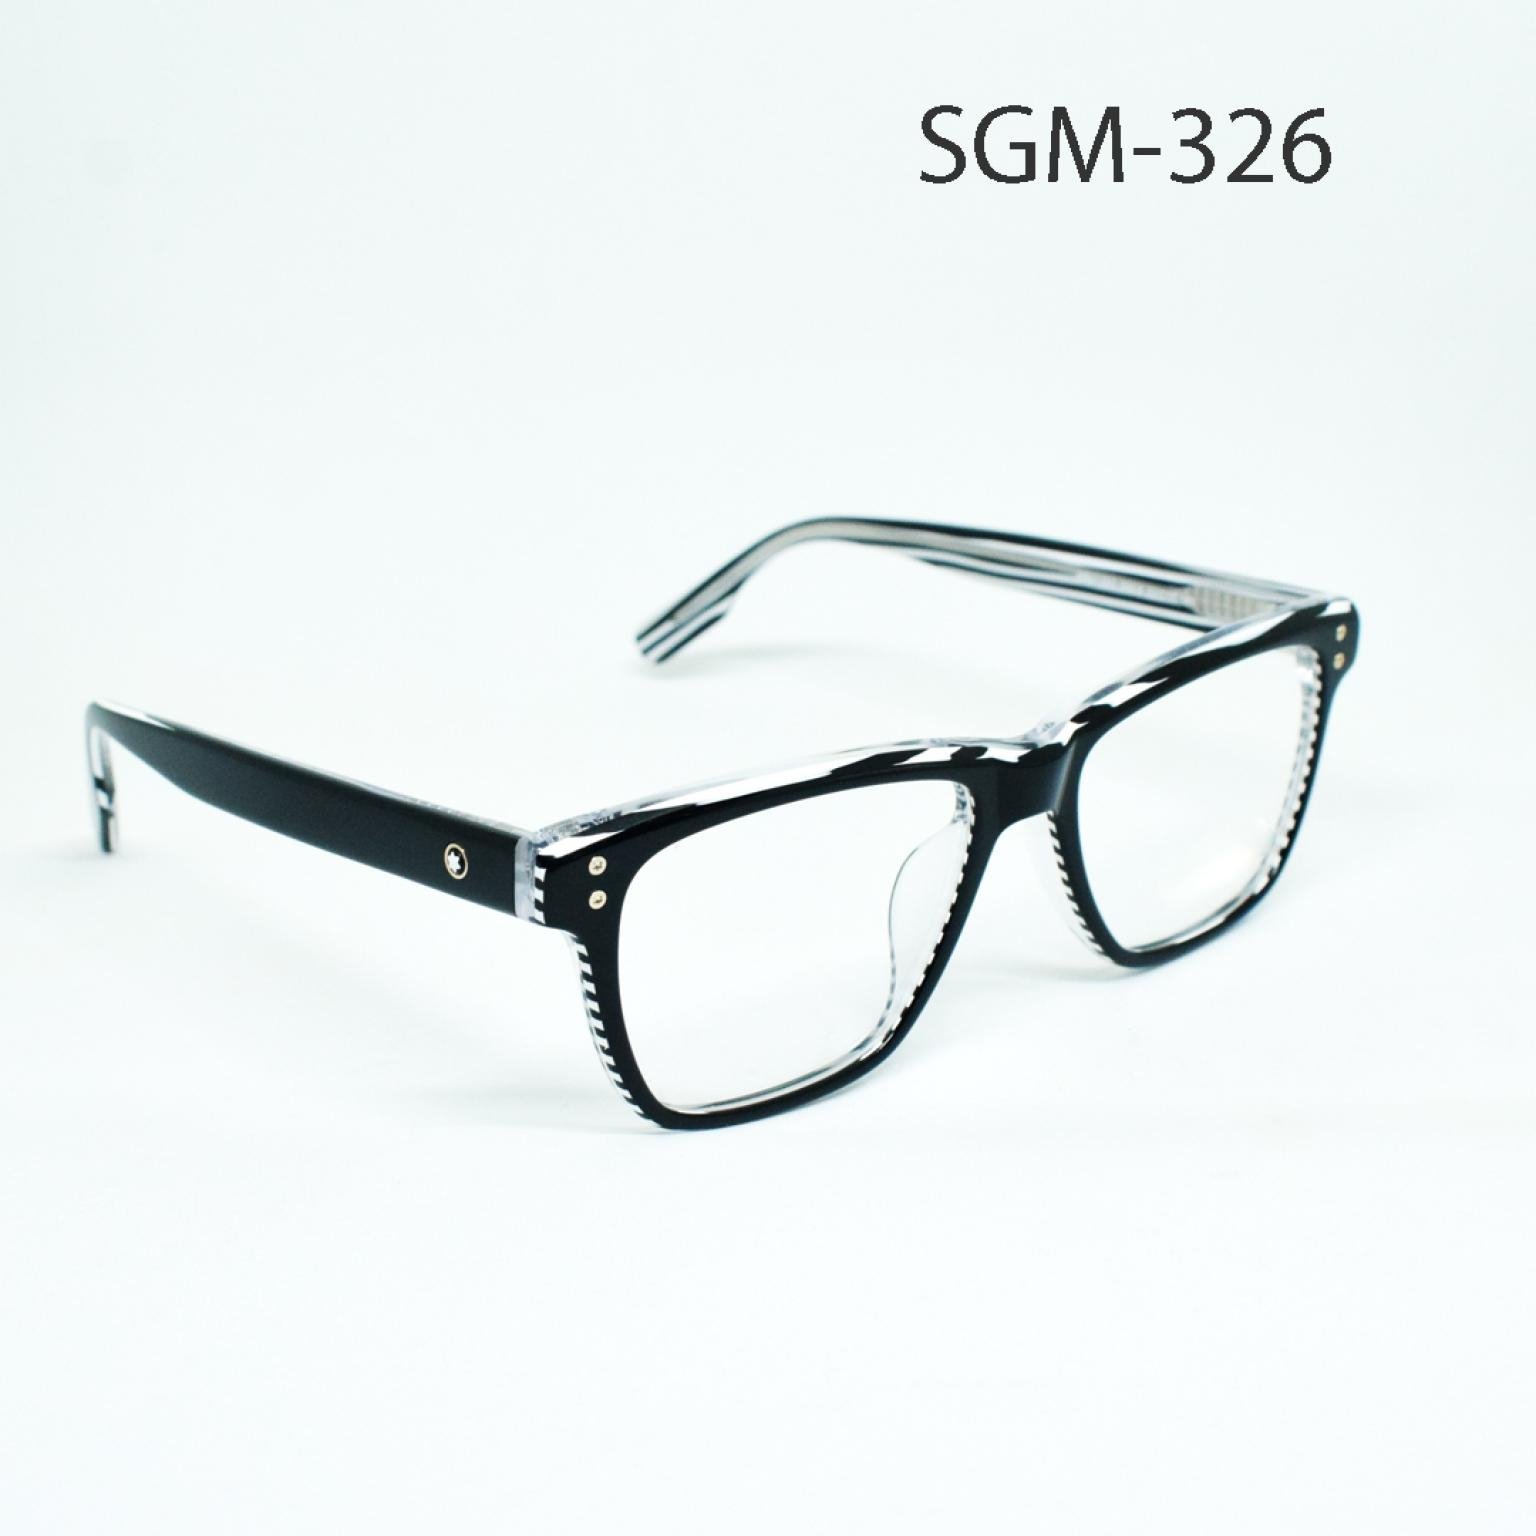 Unique Design Unisex Most Trendy Acetate Frame Premium Quality Eye Glasses With Best Price In Bd